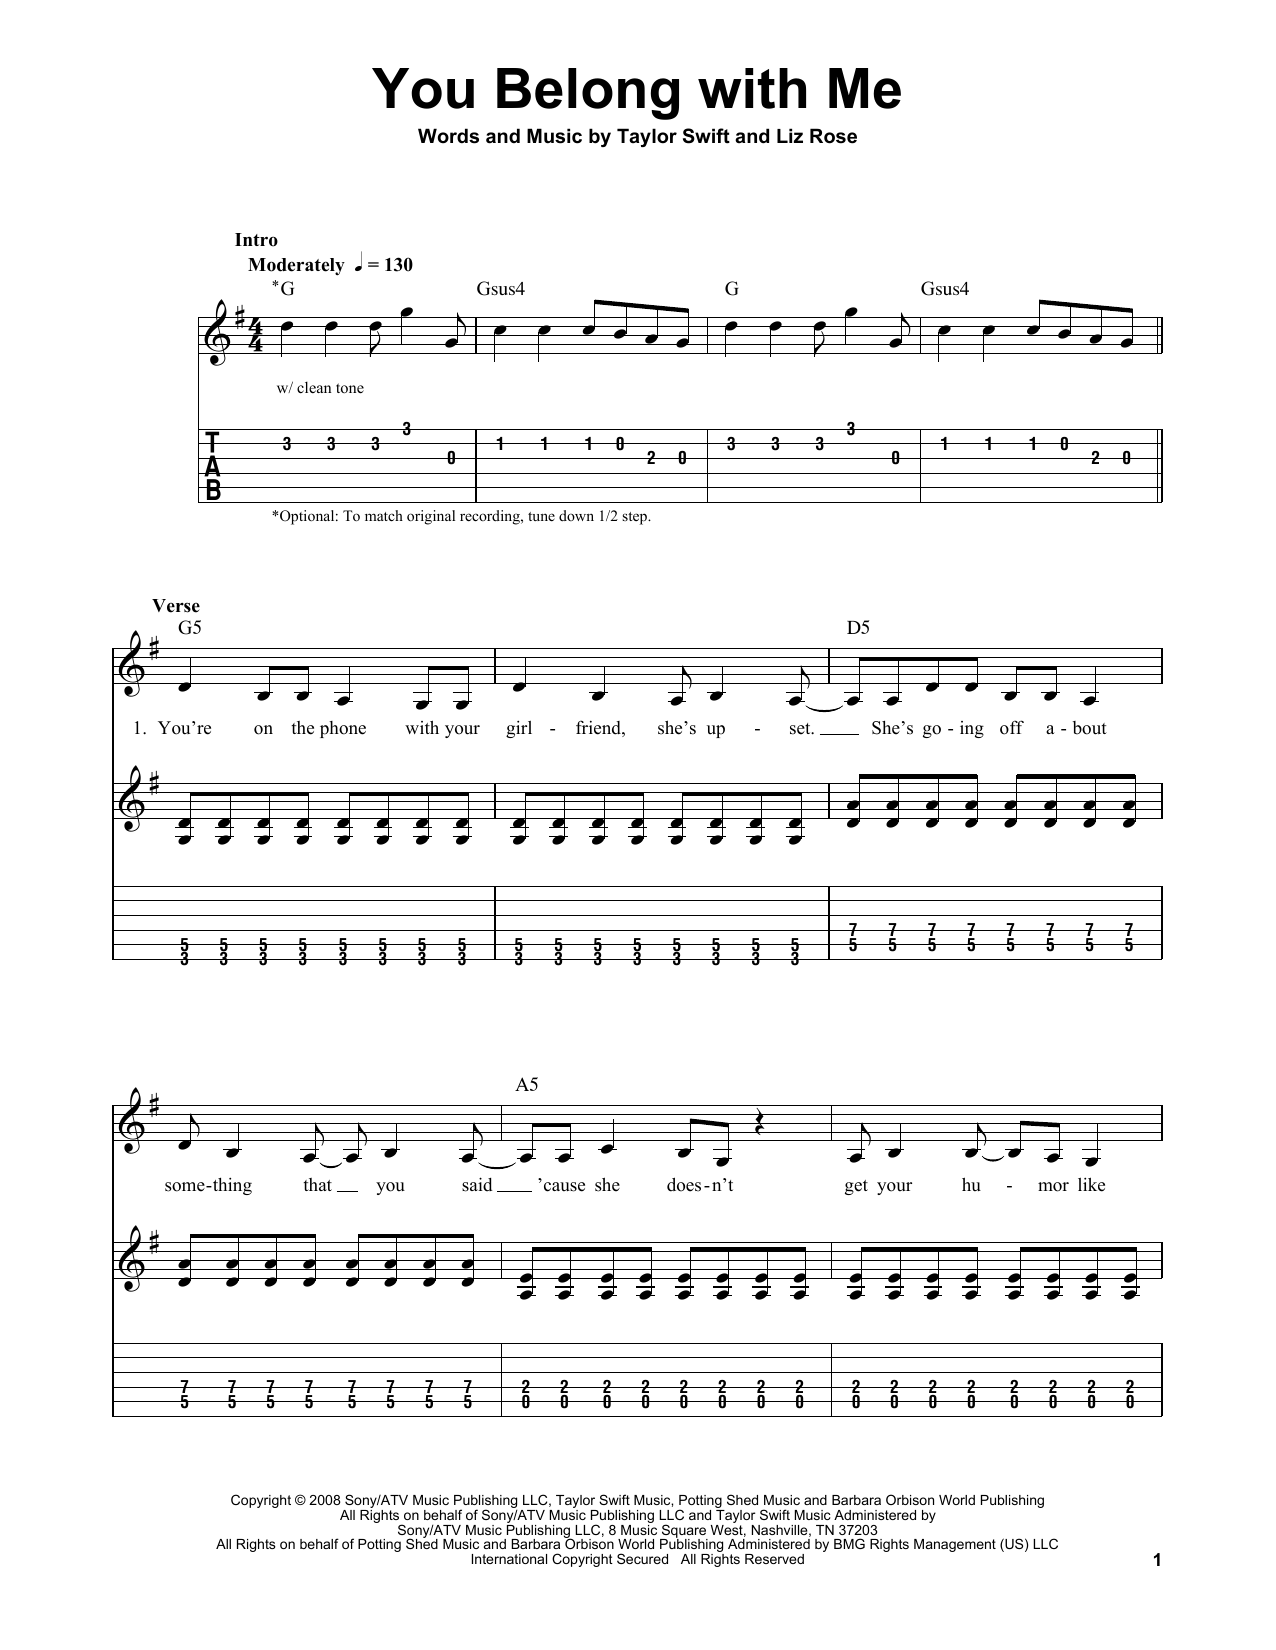 Download Taylor Swift You Belong With Me Sheet Music